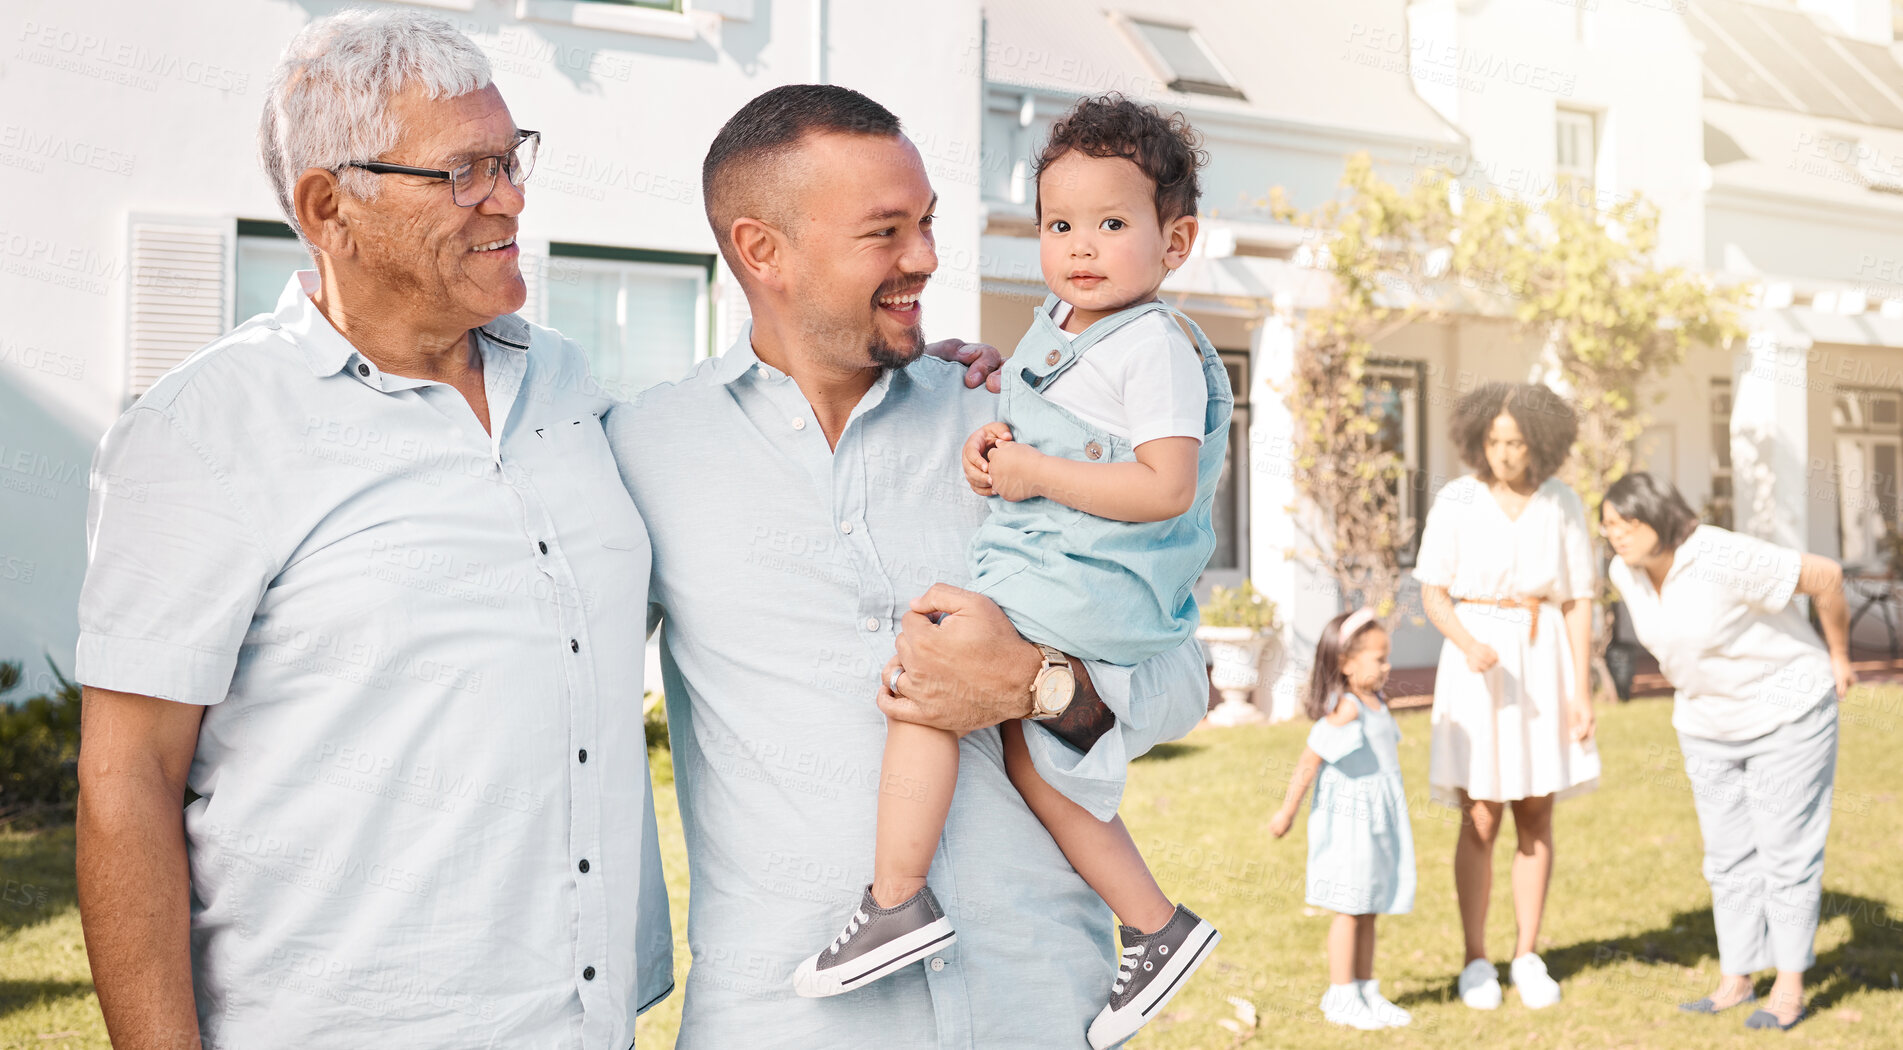 Buy stock photo Father, grandma or portrait of child in new home or real estate with a happy family with love or care. House, garden or senior grandparent with a happy man or young boy kid with a smile on a property